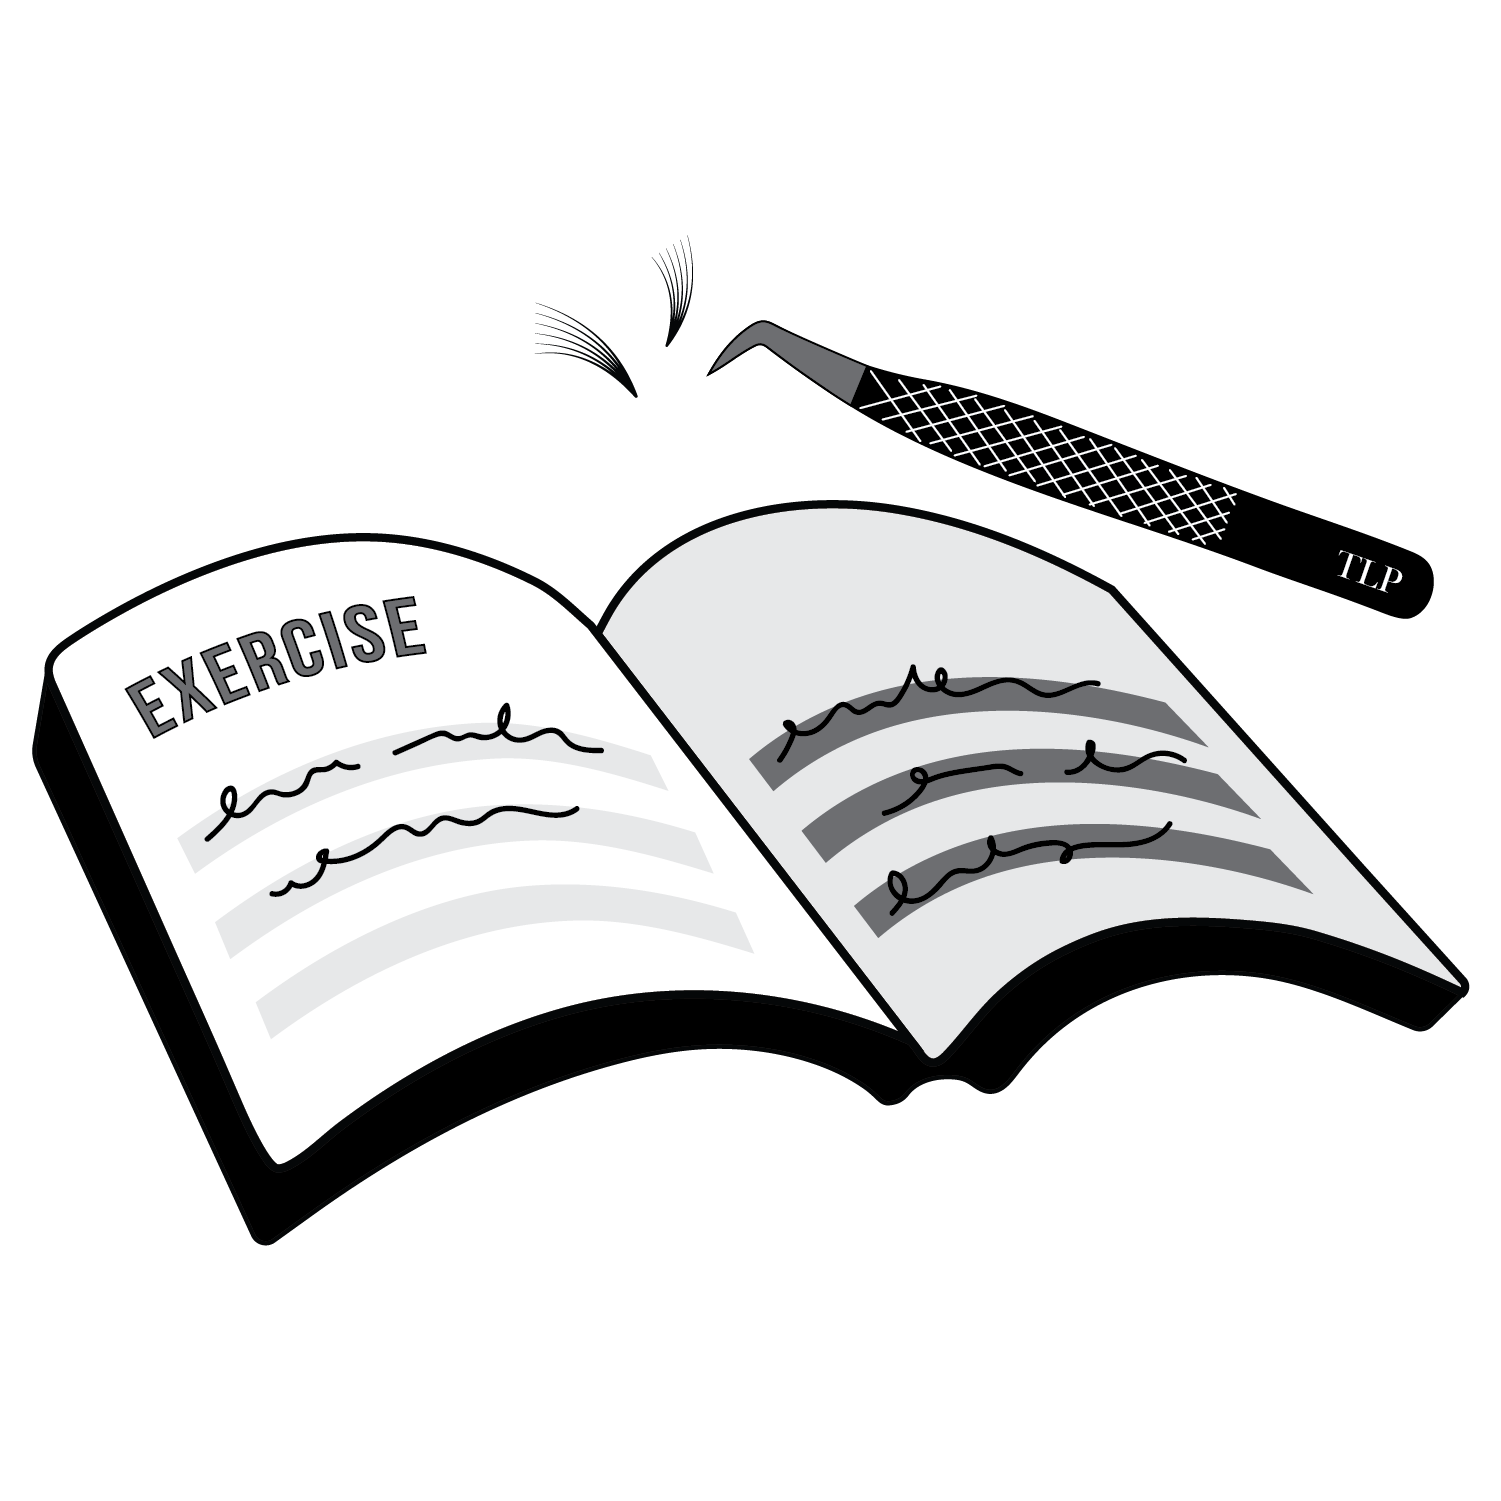 Exercise workbook with a tweezer and lash fans